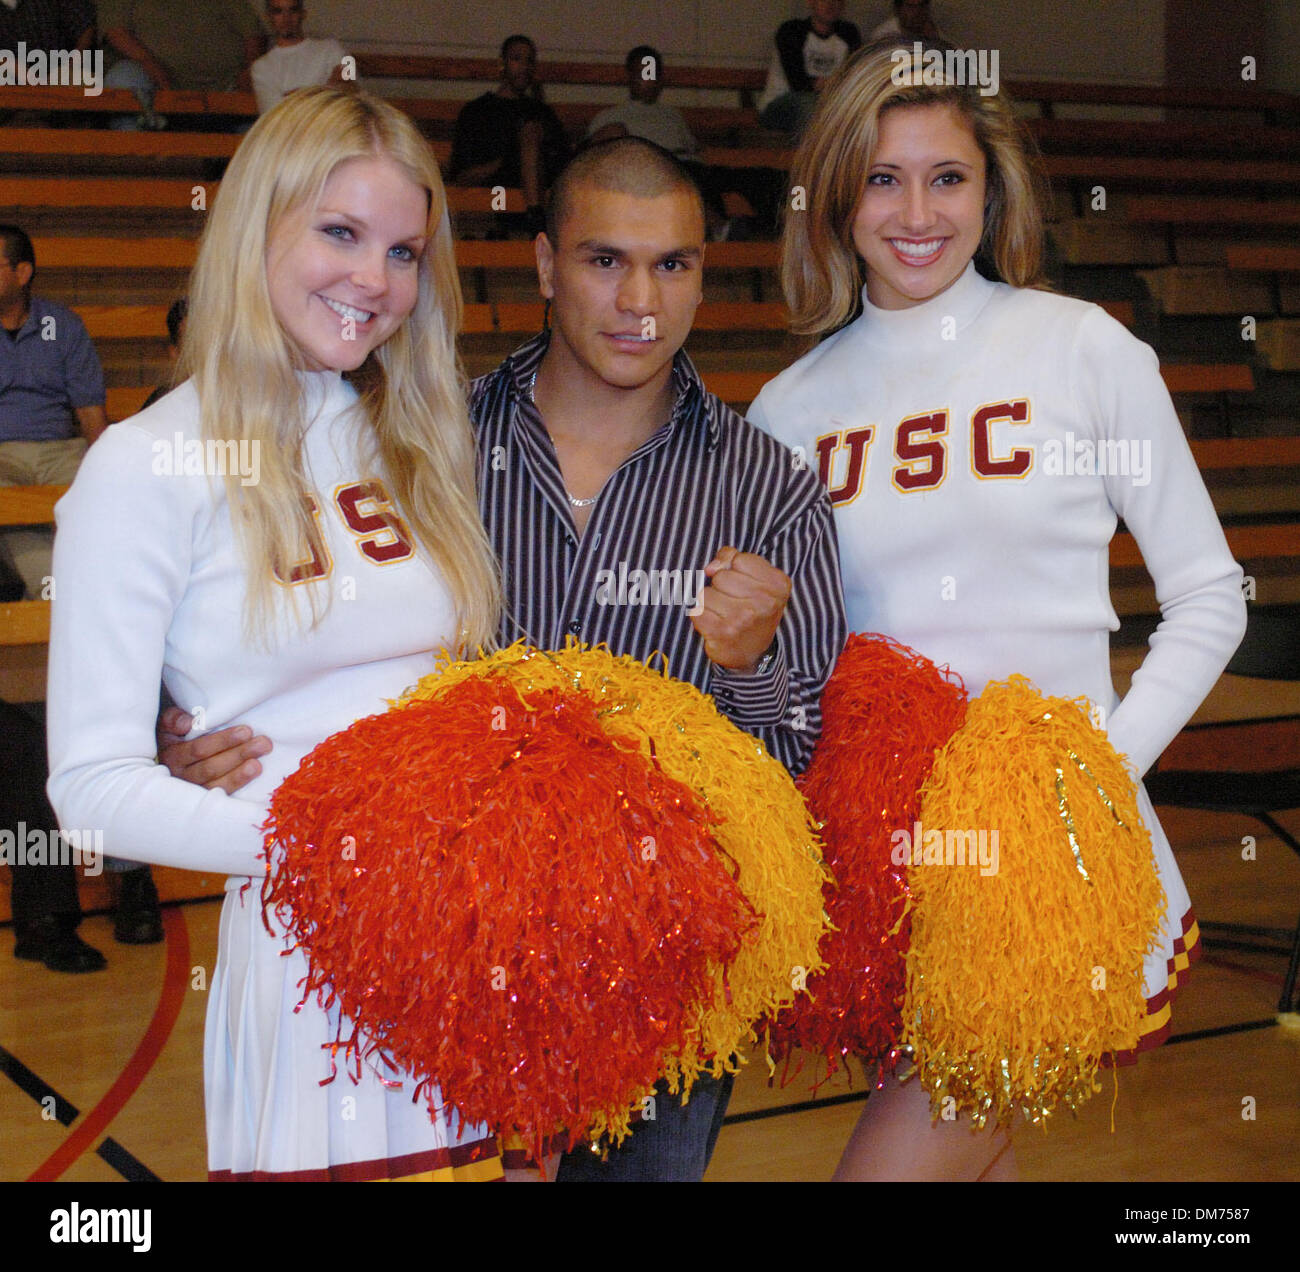 Sep 25, 2005; Los Angeles, CA, USA; Boxer DANIEL PONCE DE LEON and USC cheerleaders watch Javier Jauregui (49-12-2 34KO) (Brown trunks) defeats Randy Suico (23-1 20KO) (White trunks) via unanimous decision at The USC Lyon Events Center. The Bout was the headline event for Oscar De La Hoya's 'Solo Boxeo De Miller' promoted by Golden Boy Promotions. Mandatory Credit: Photo by Rob DeL Stock Photo